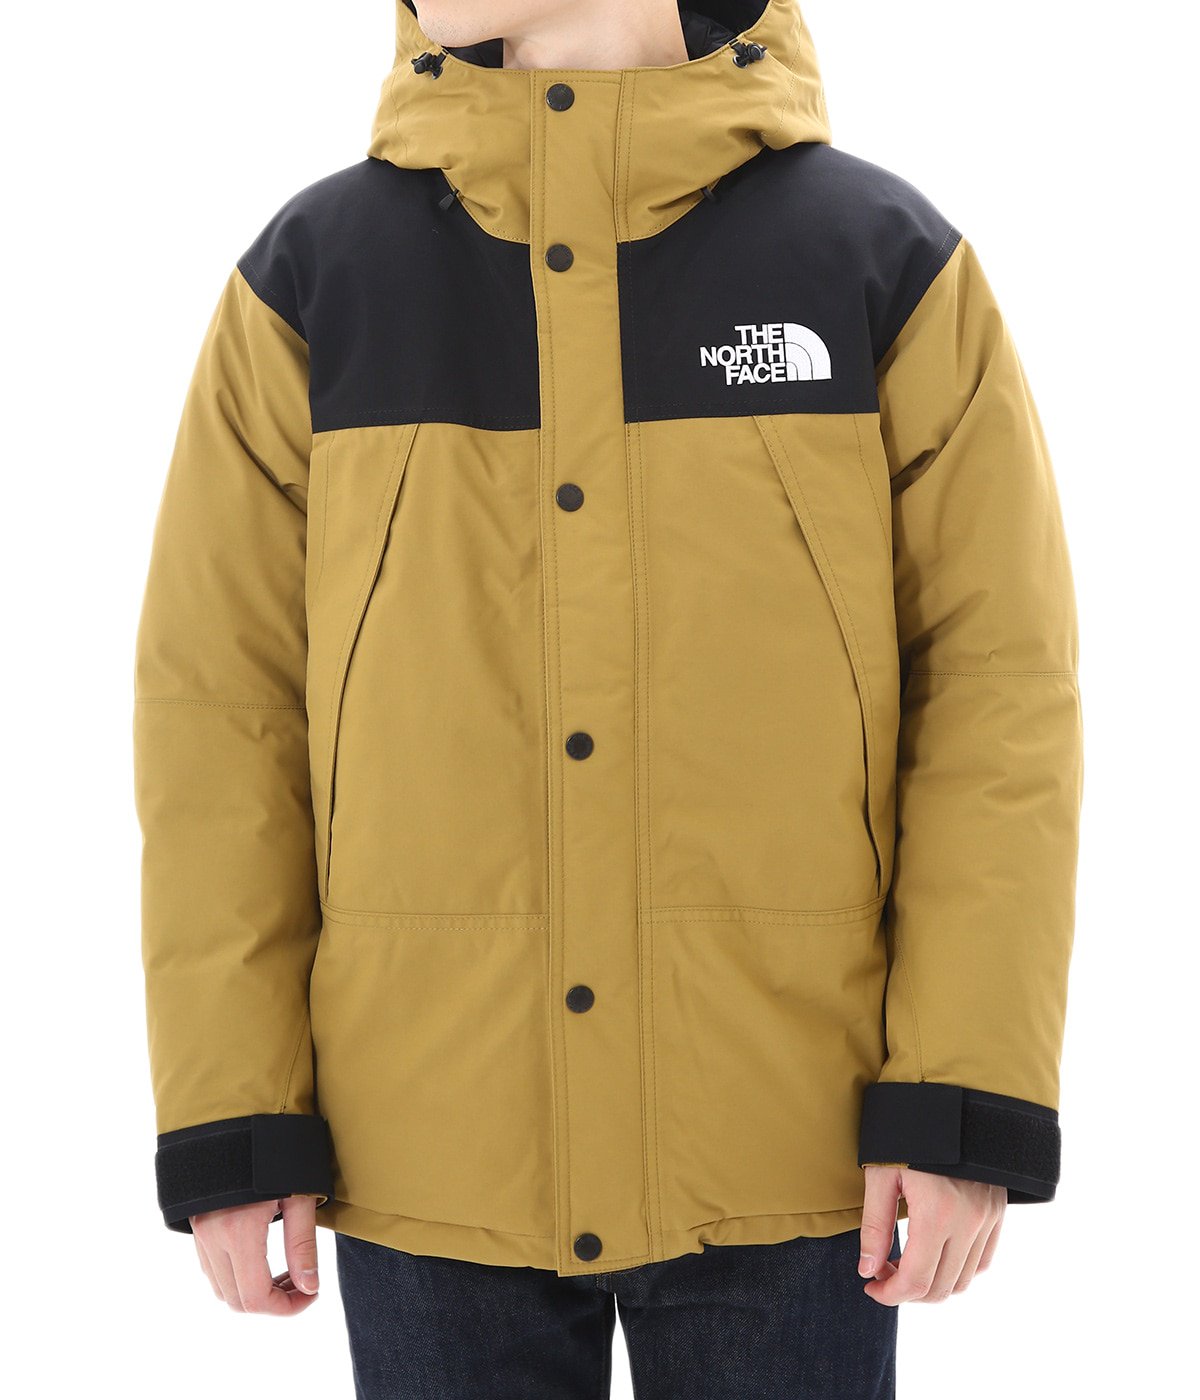 Mountain Down Jacket(XS ブラック): 通常商品 - 通販 / ARKnets(アークネッツ)